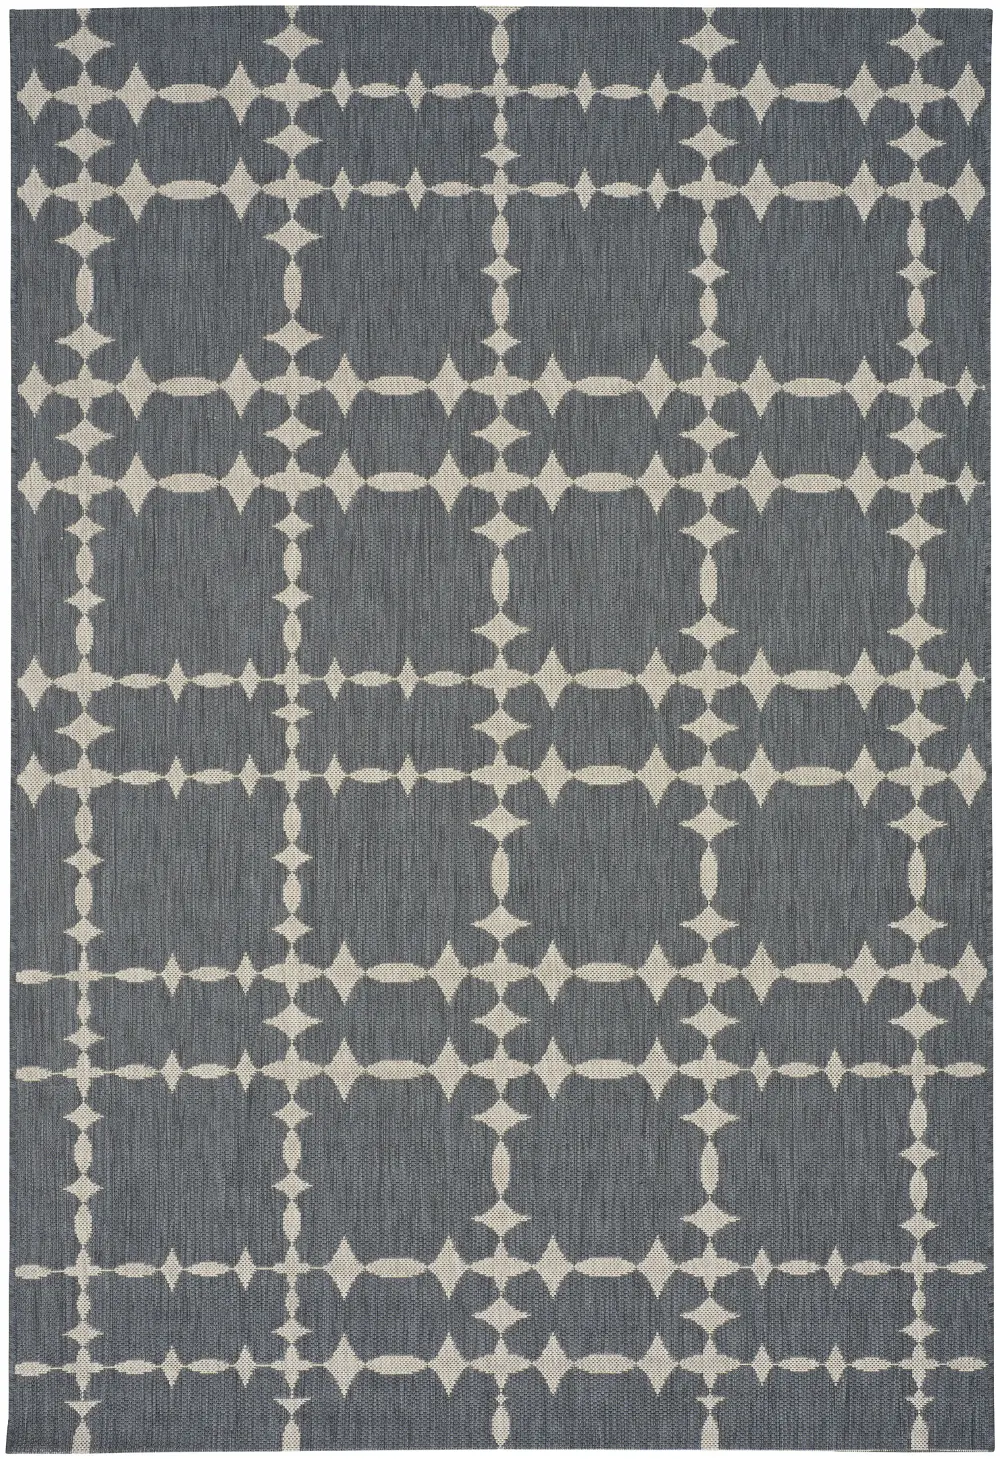 4738RS05030706300 5 x 8 Medium Charcoal Gray Indoor-Outdoor Rug - Finesse-Tower Court-1